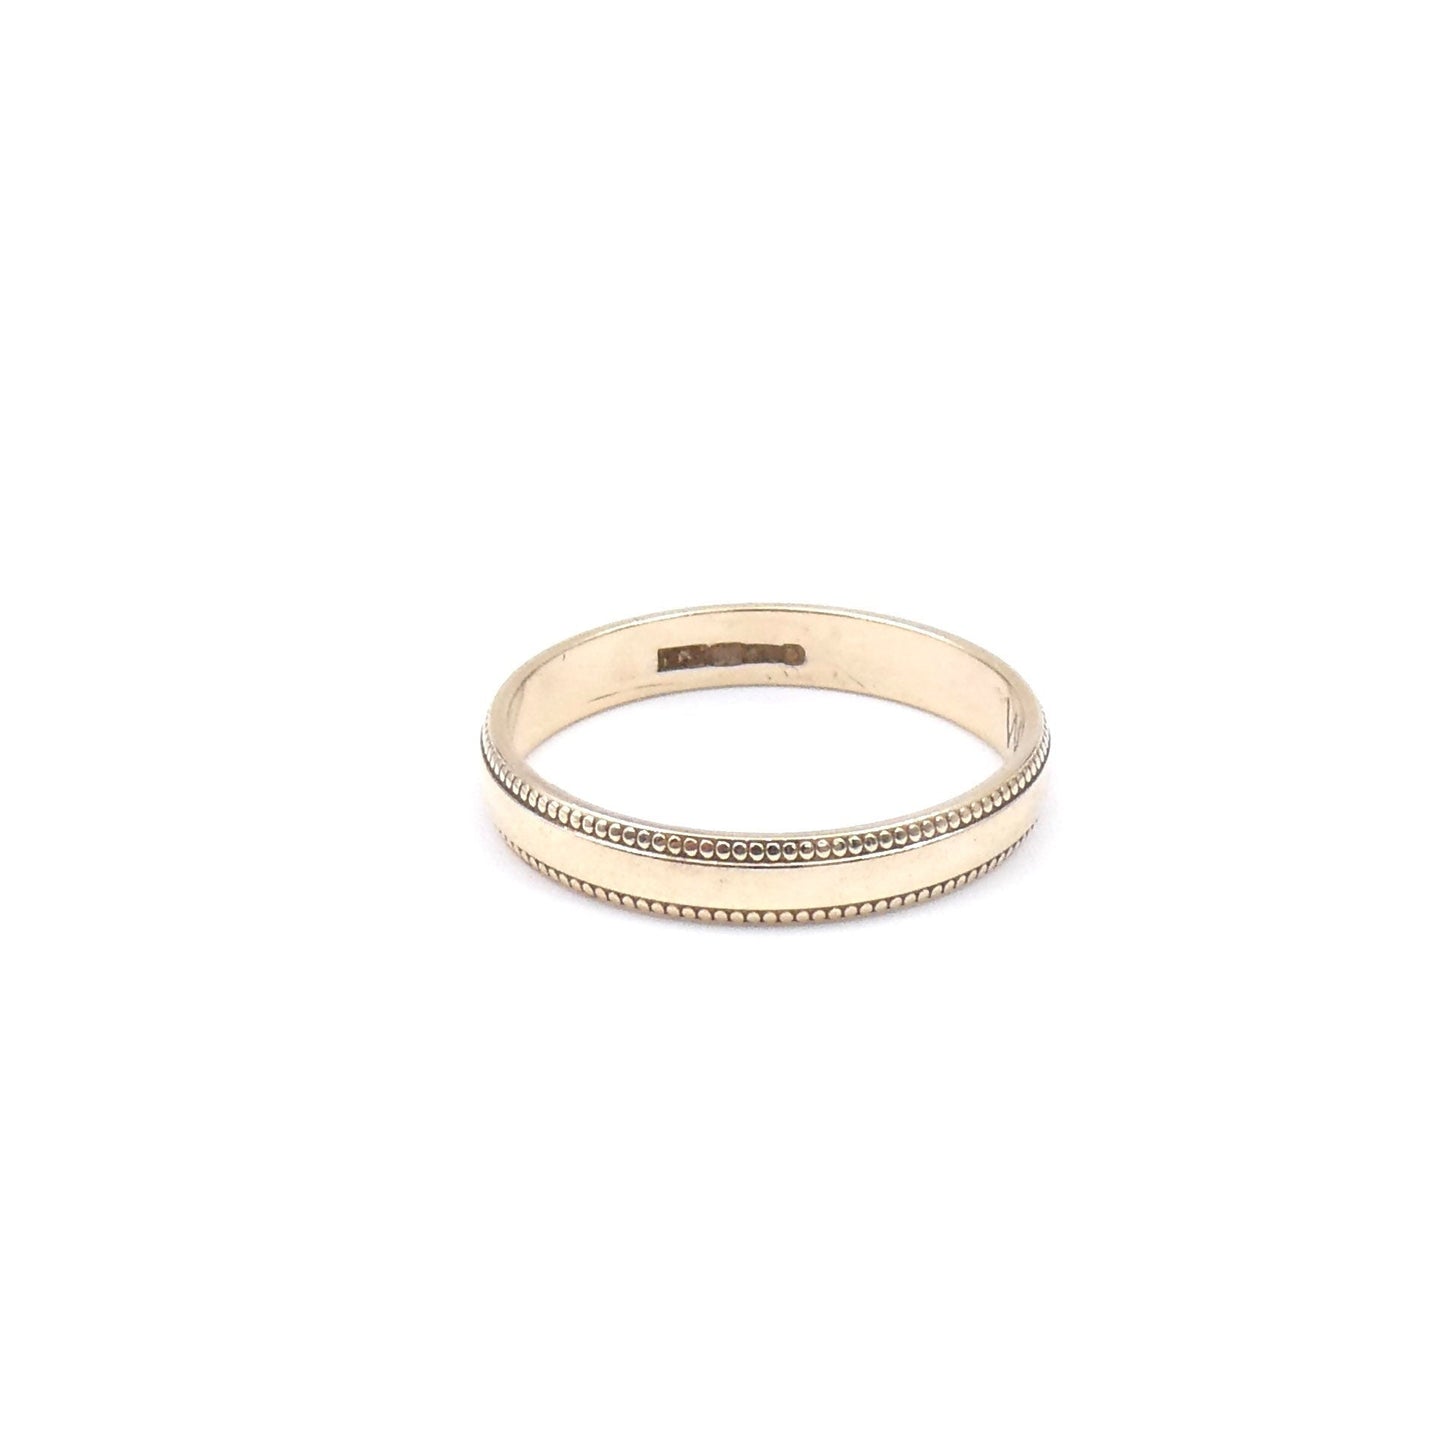 A gold band with a beaded edge, 9kt gold wedding band with detail. - Collected